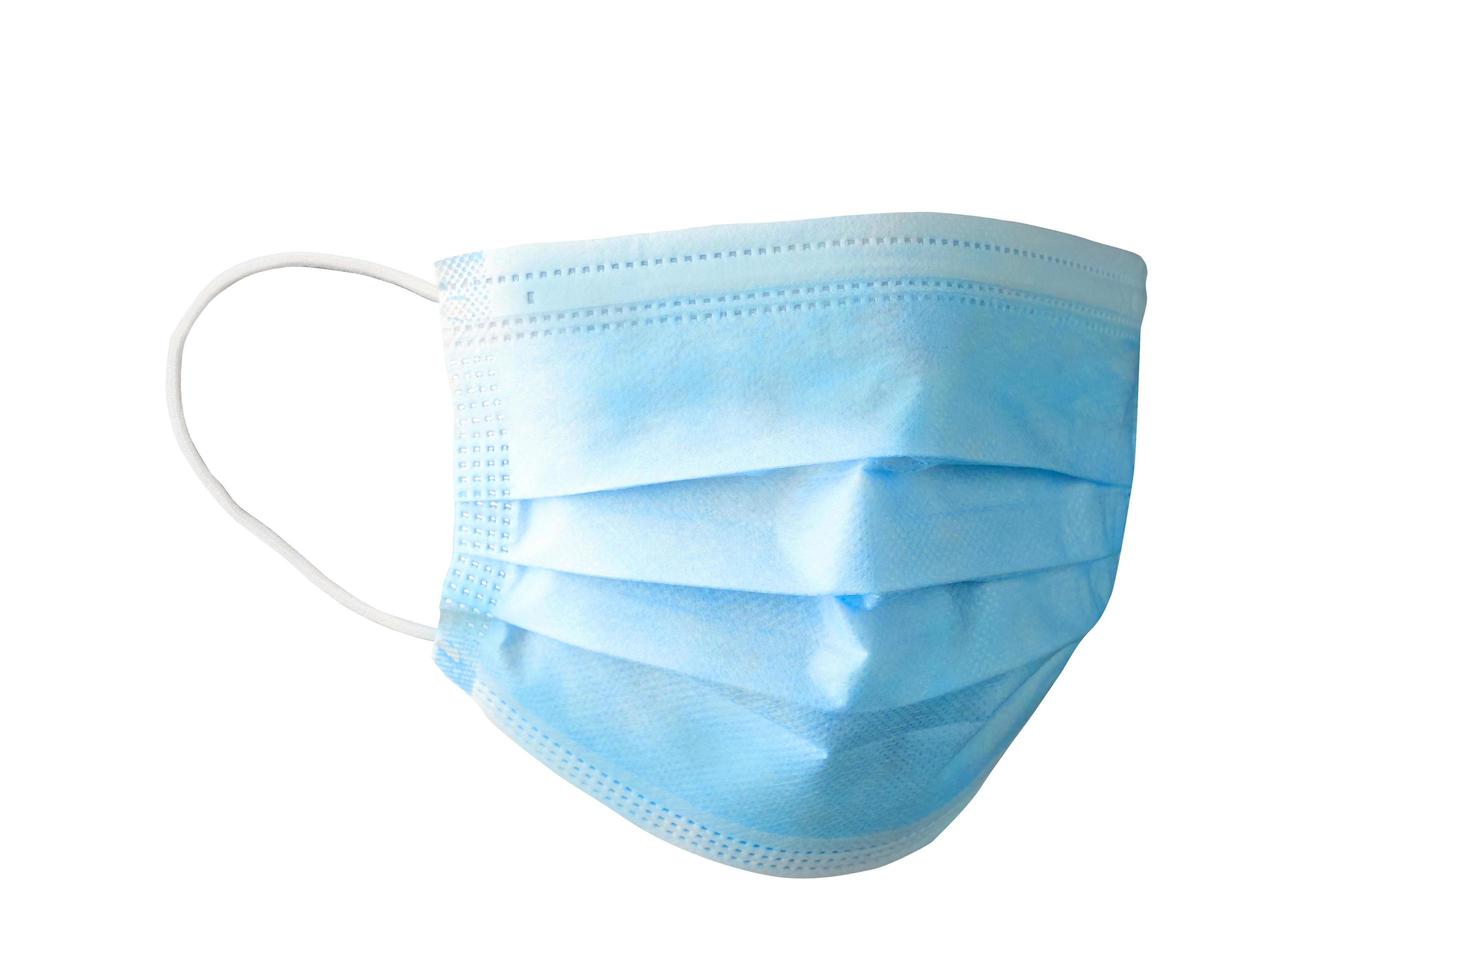 surgical or medical face mask to prevent corona virus protection isolated on white background with clipping path. blue doctor mask photo